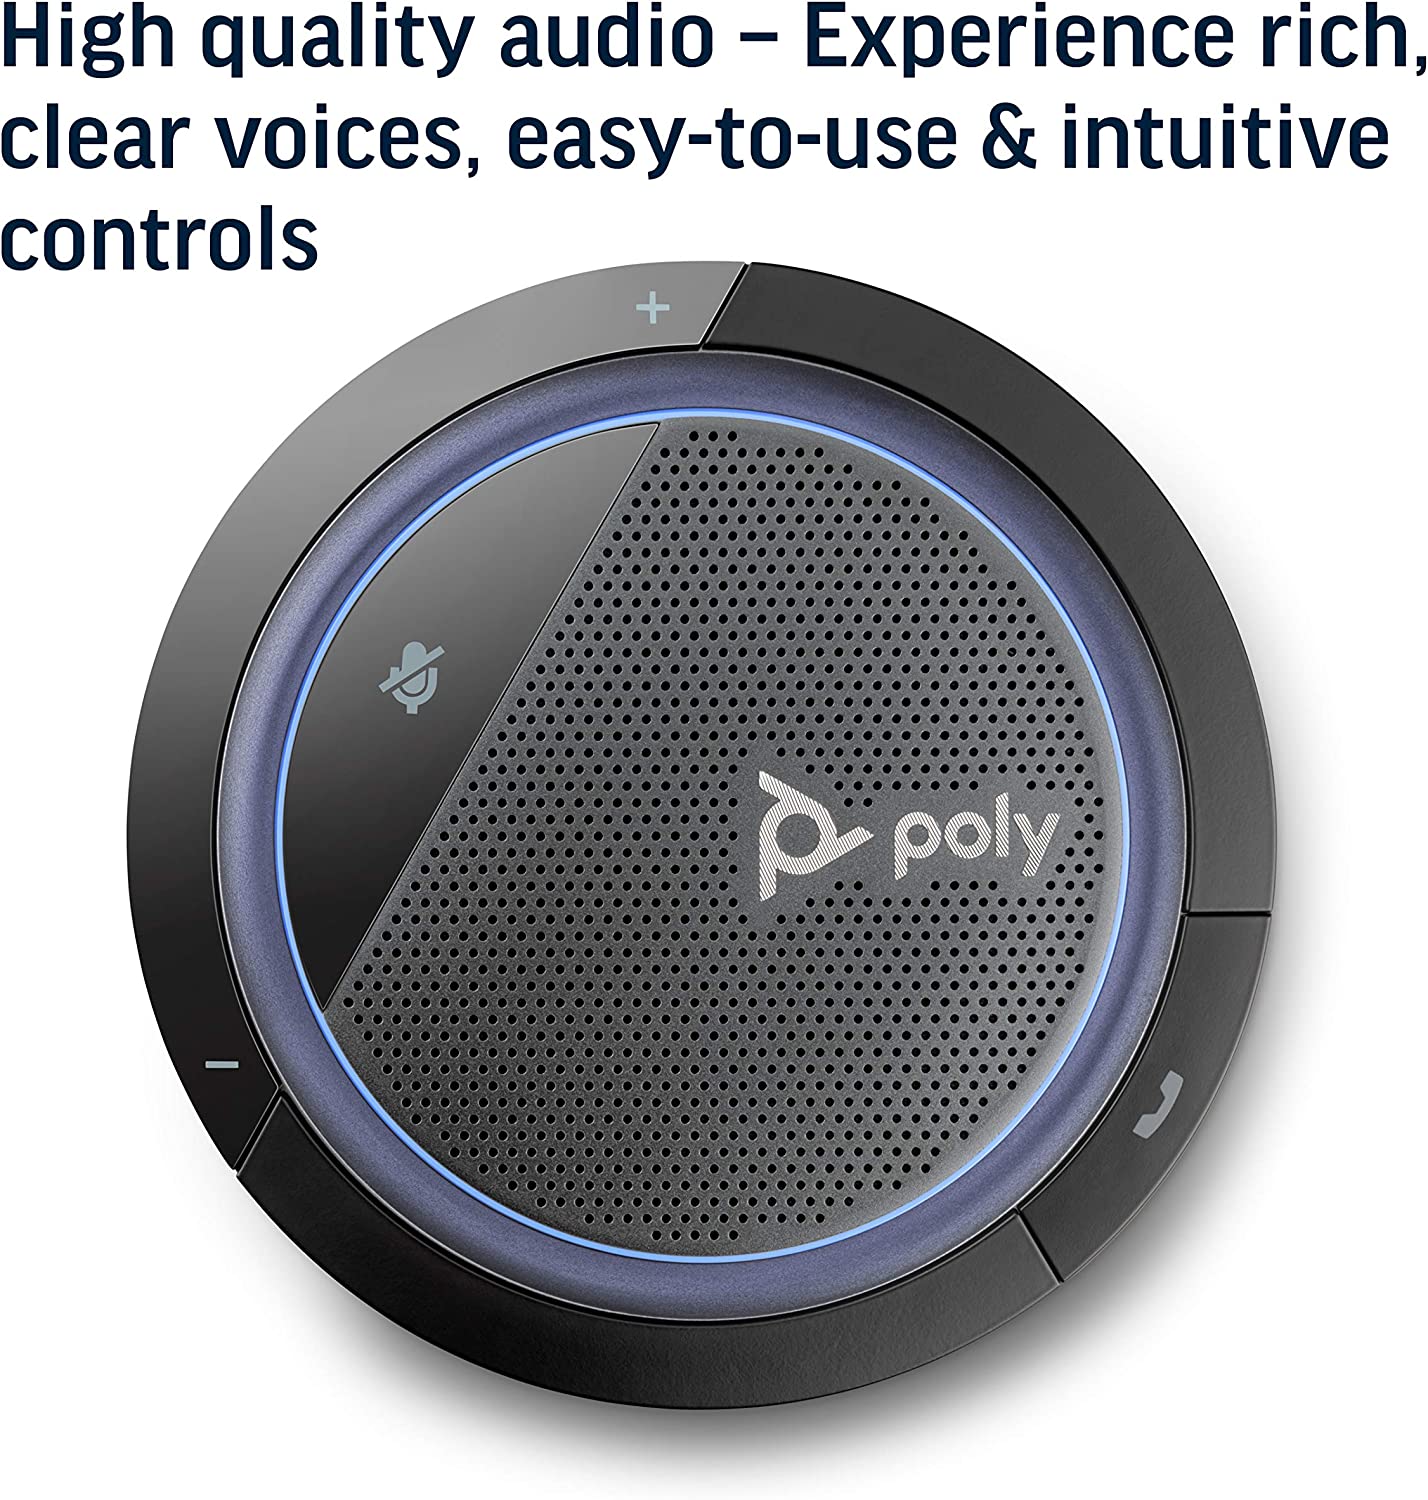 Poly 214181-01 Calisto 3200 CL3200-M USB-A Personal Corded UC 360 Degree Audio Speakerphone